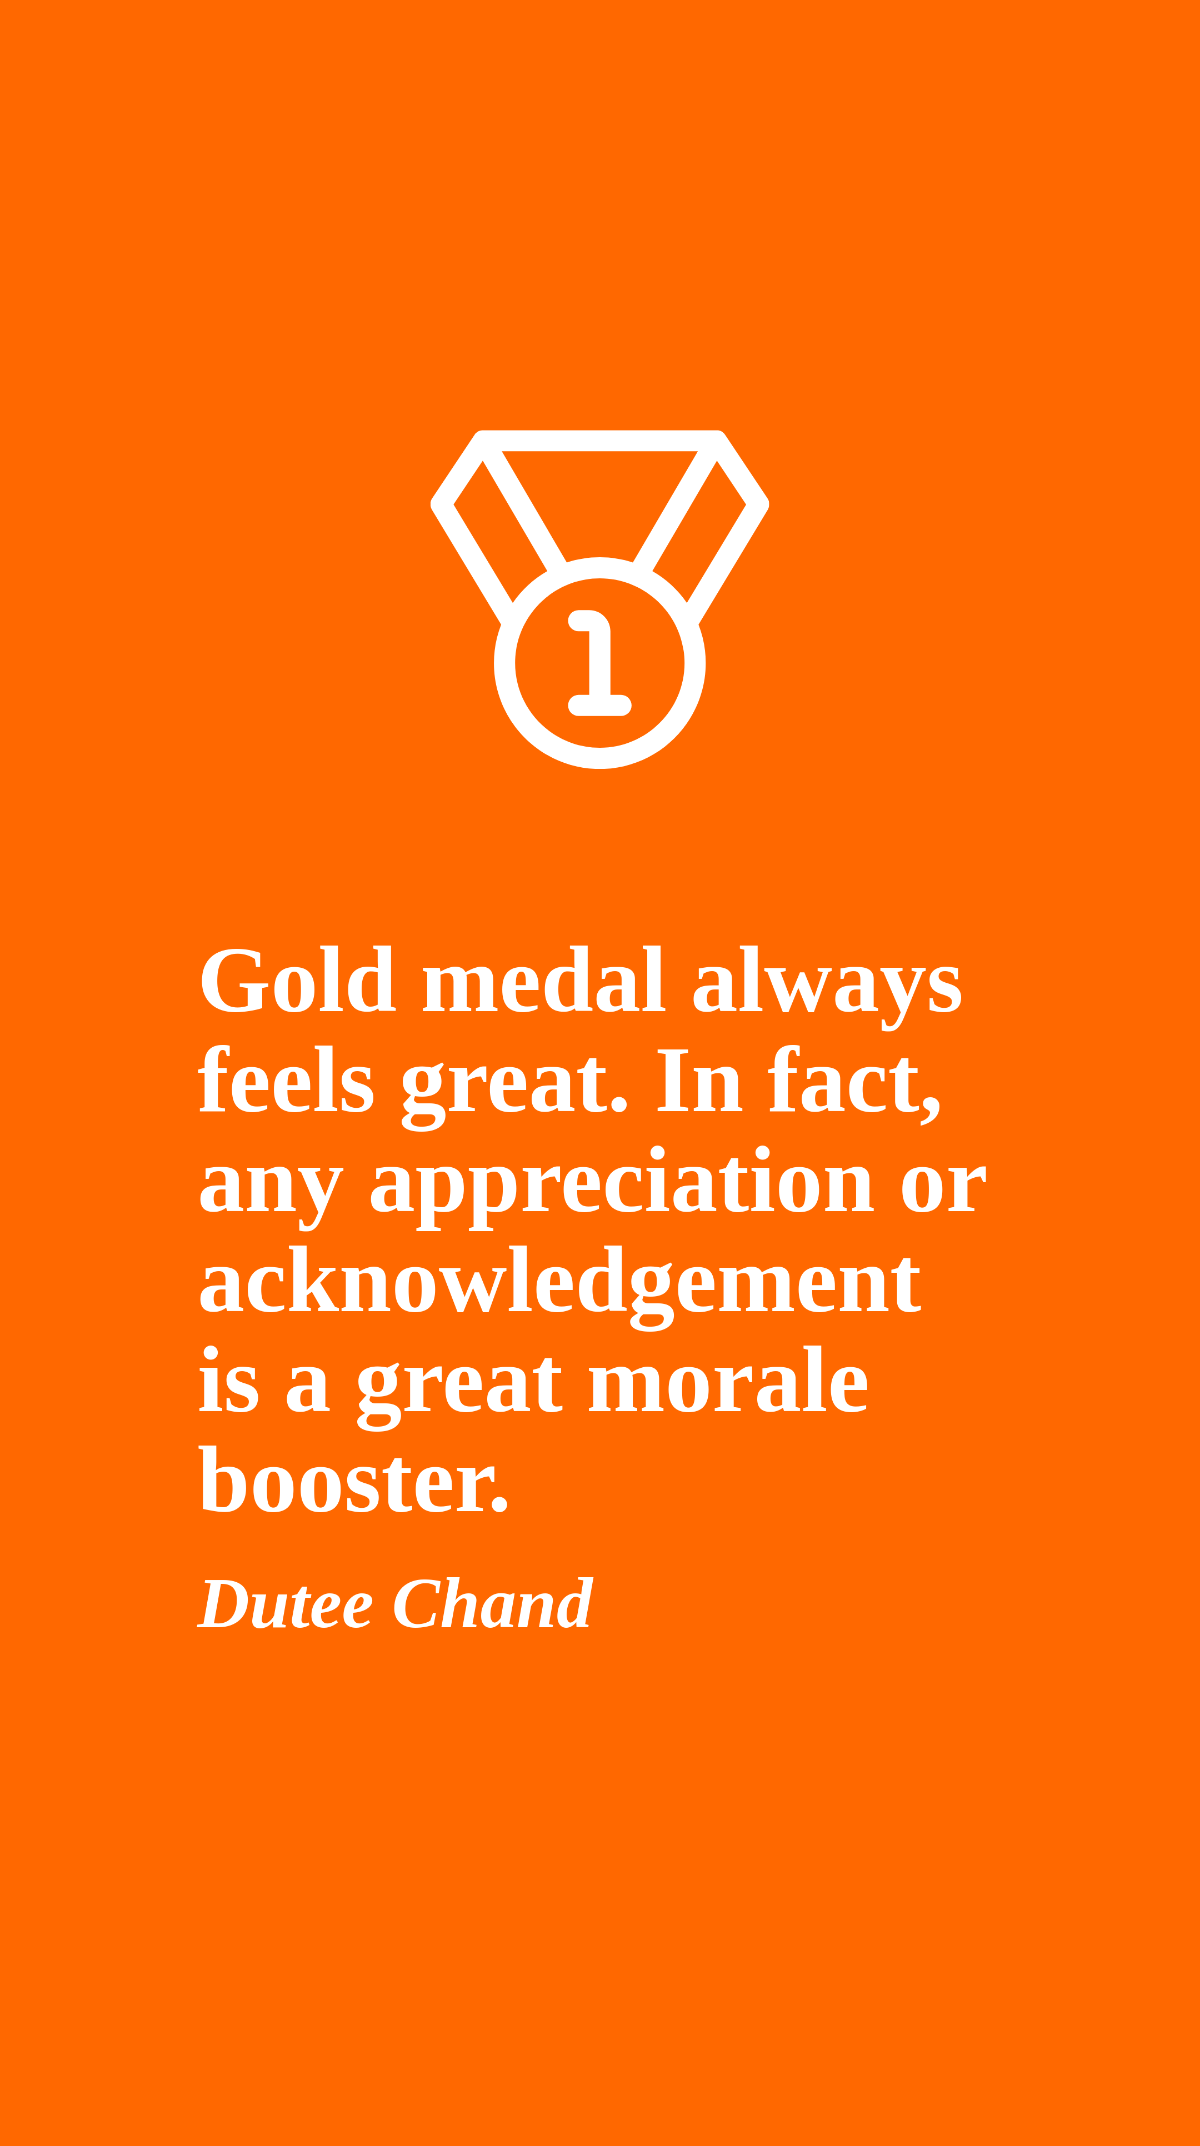 Dutee Chand - Gold medal always feels great. In fact, any appreciation or acknowledgement is a great morale booster.